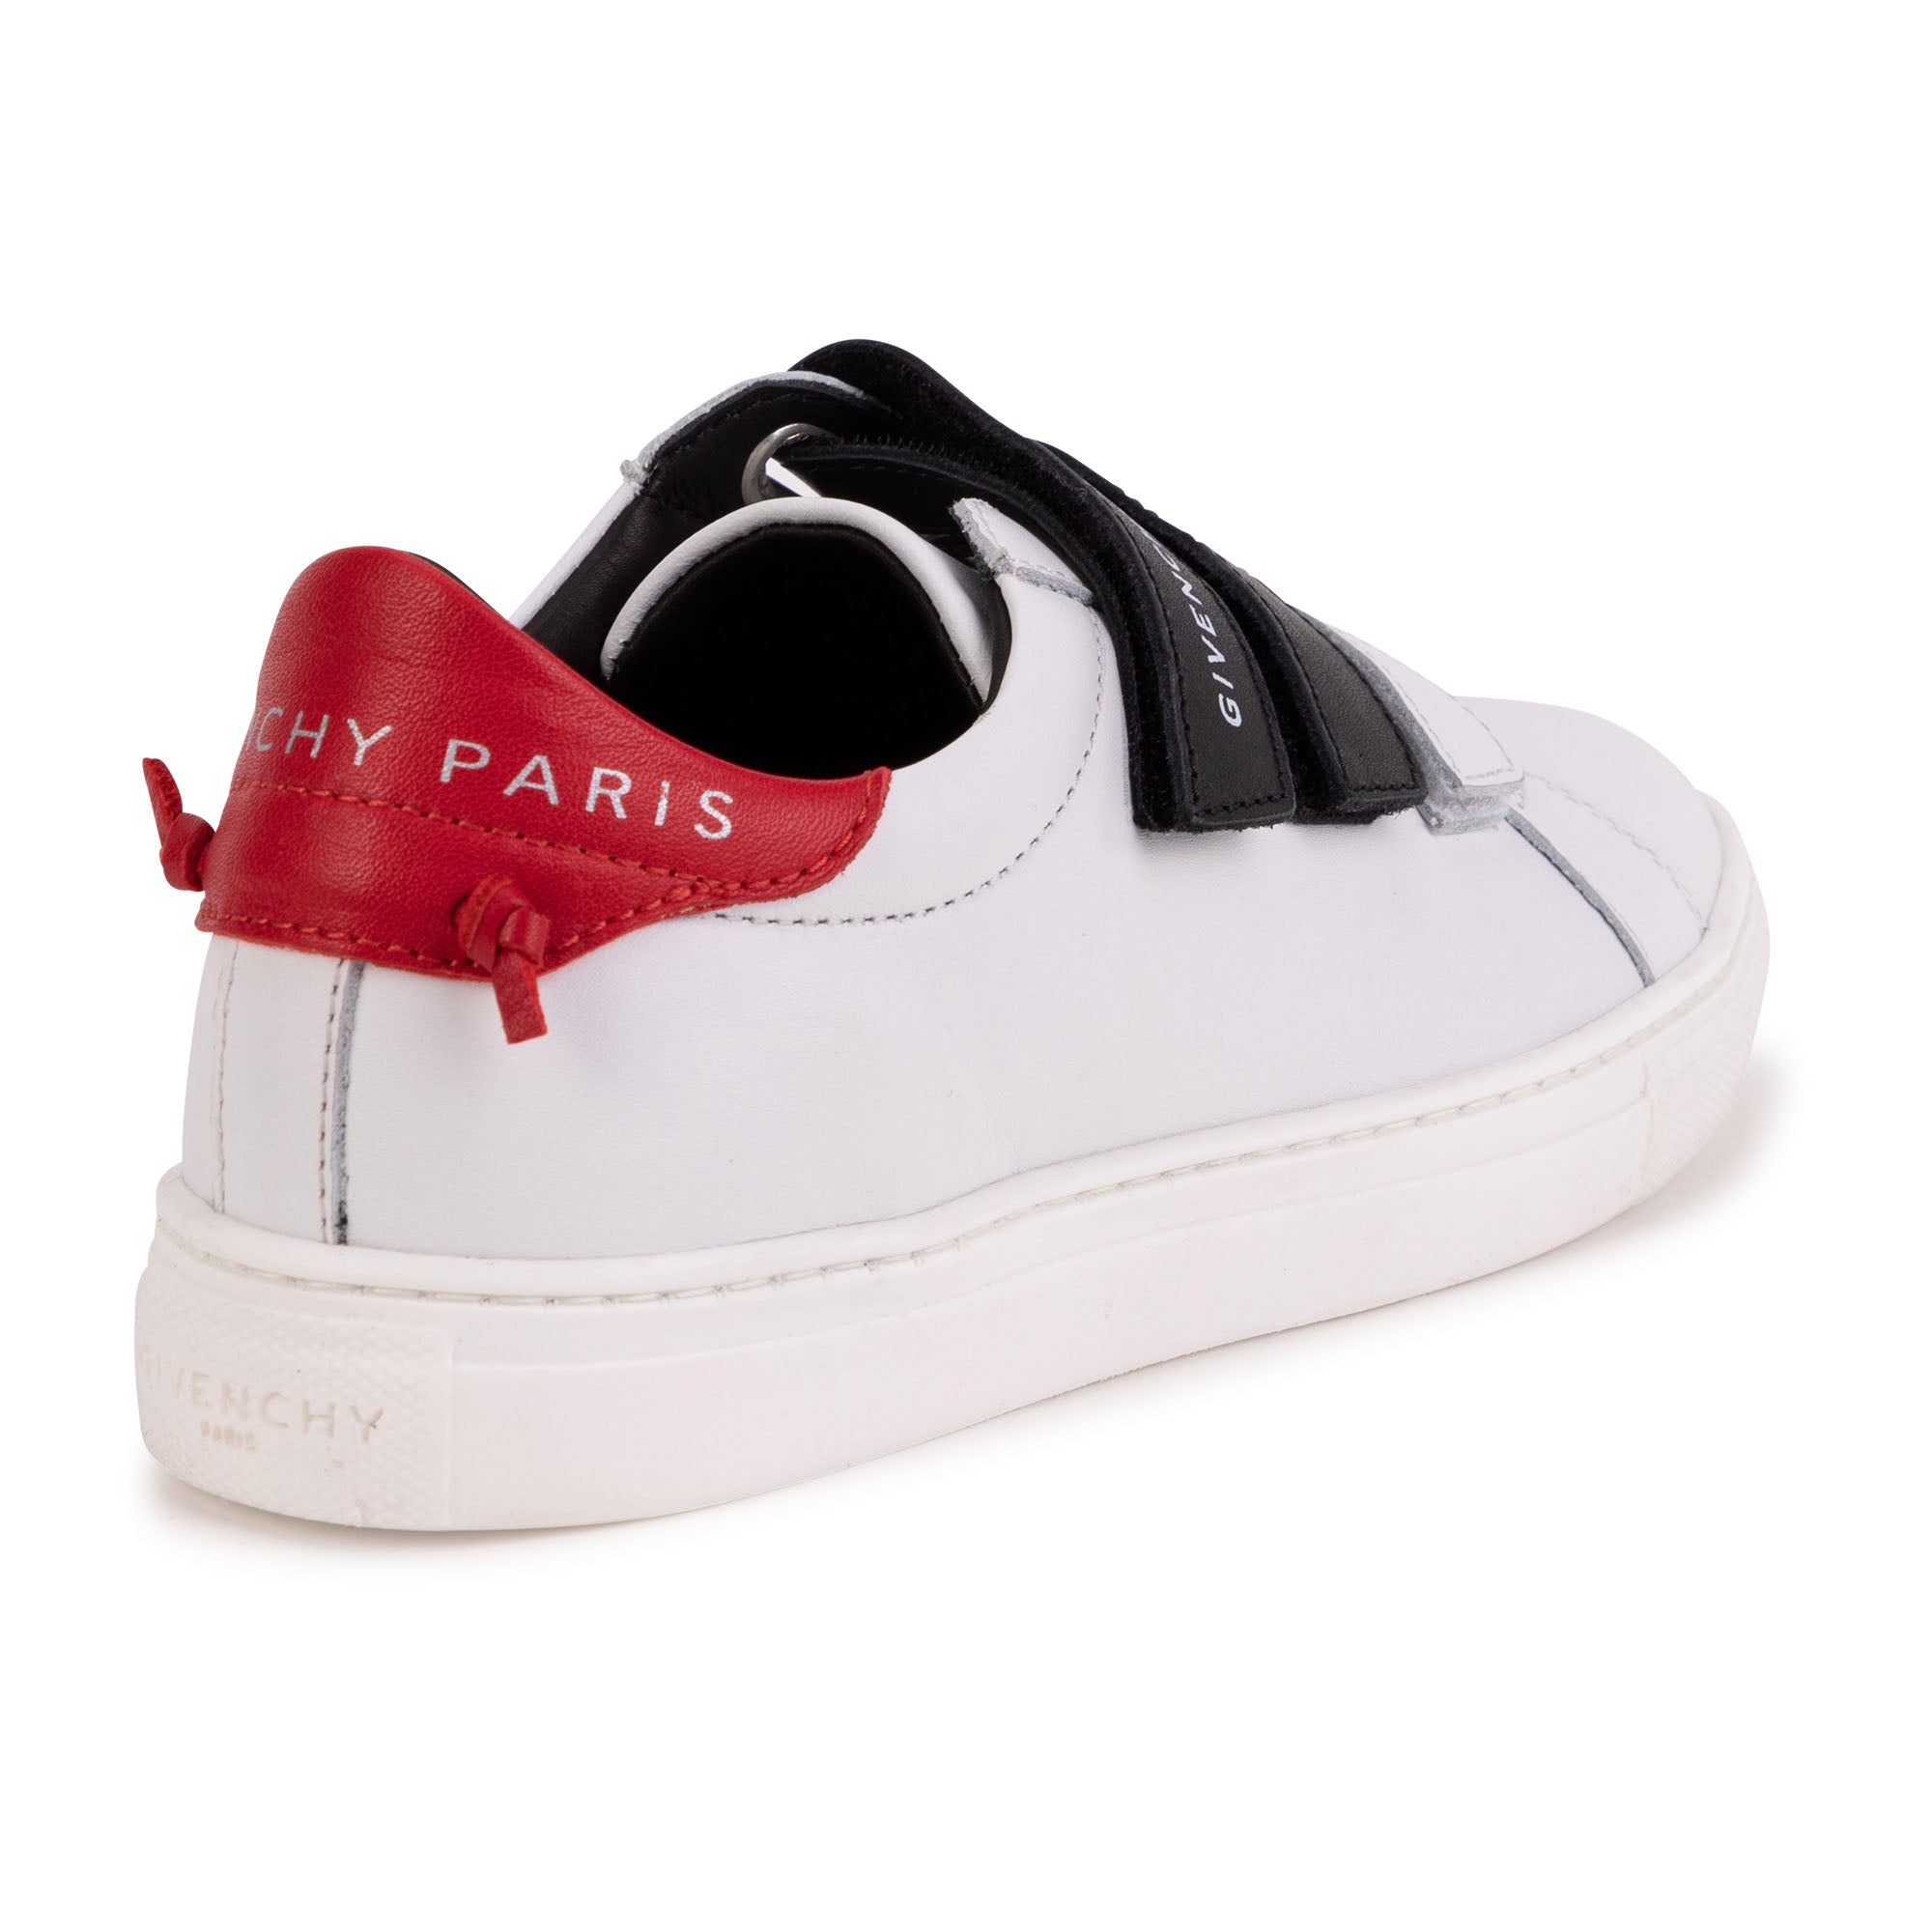 Boys White Leather Shoes